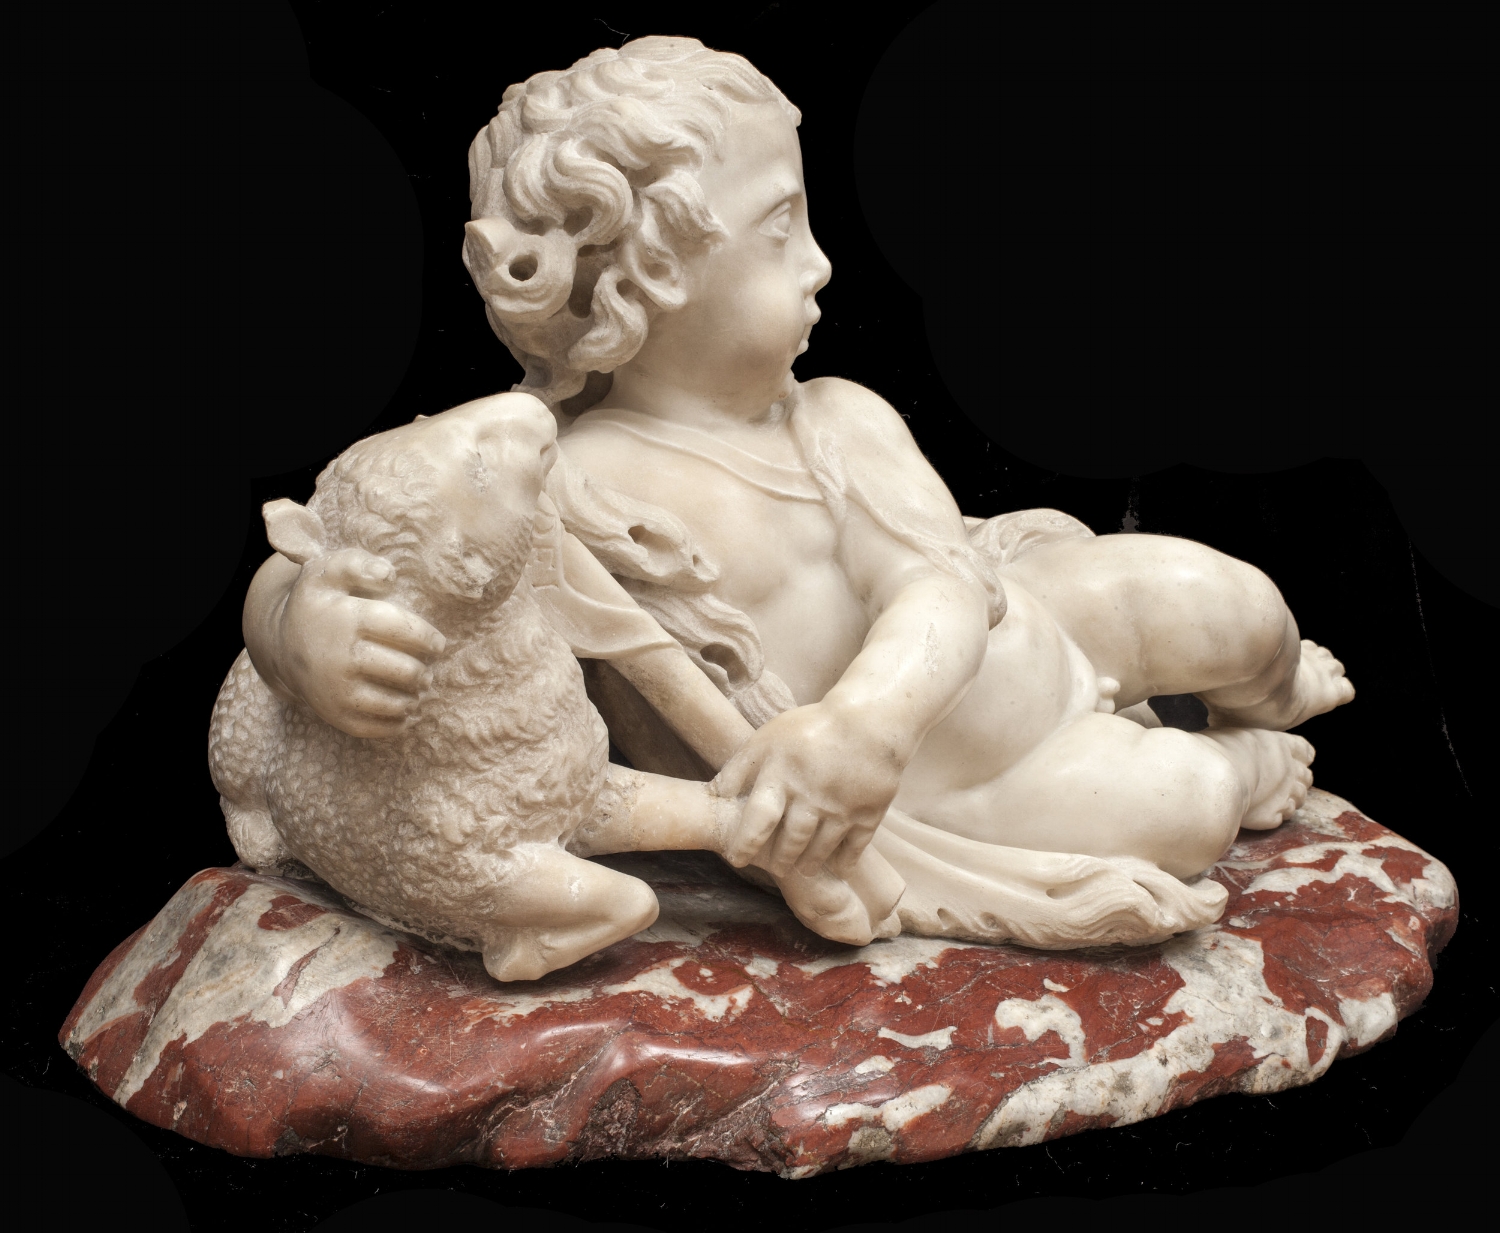 Attributed to Giusto le Court, The Infant St. John the Baptist with a Lamb - View from the Left